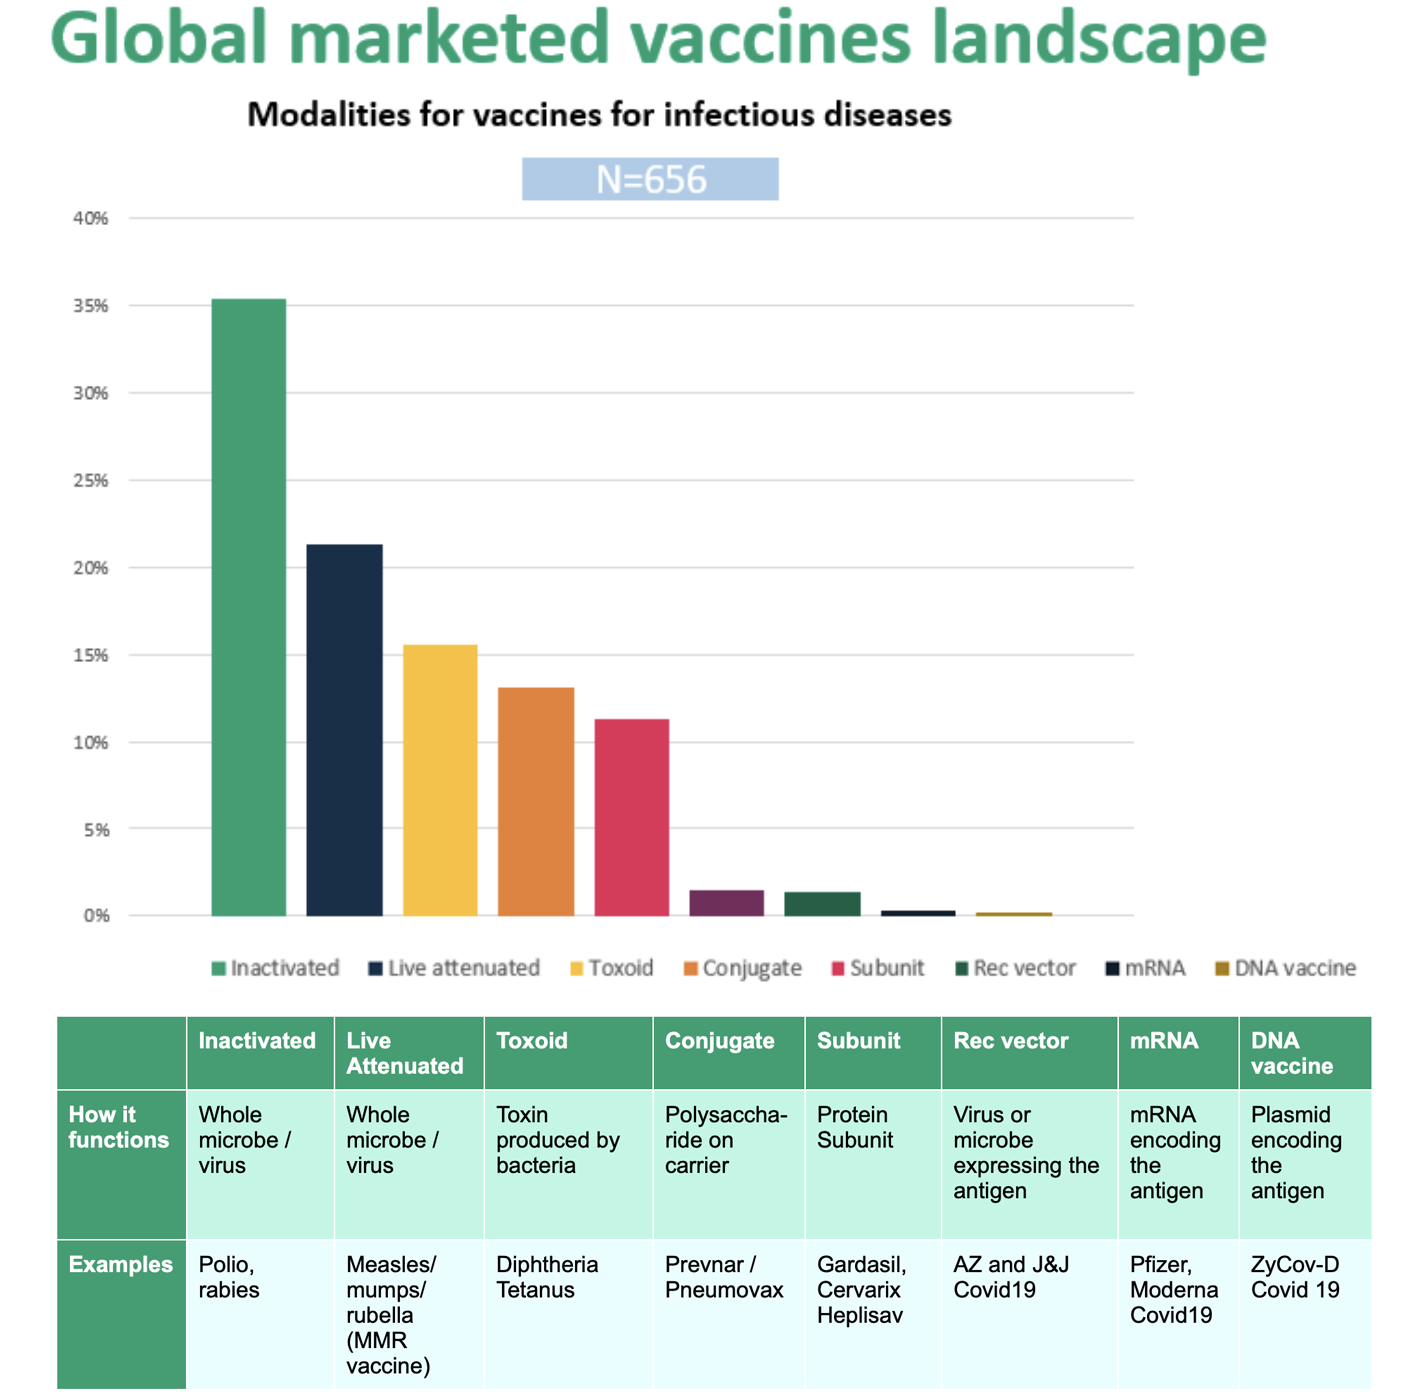 Vaccine technologies are changing rapidly